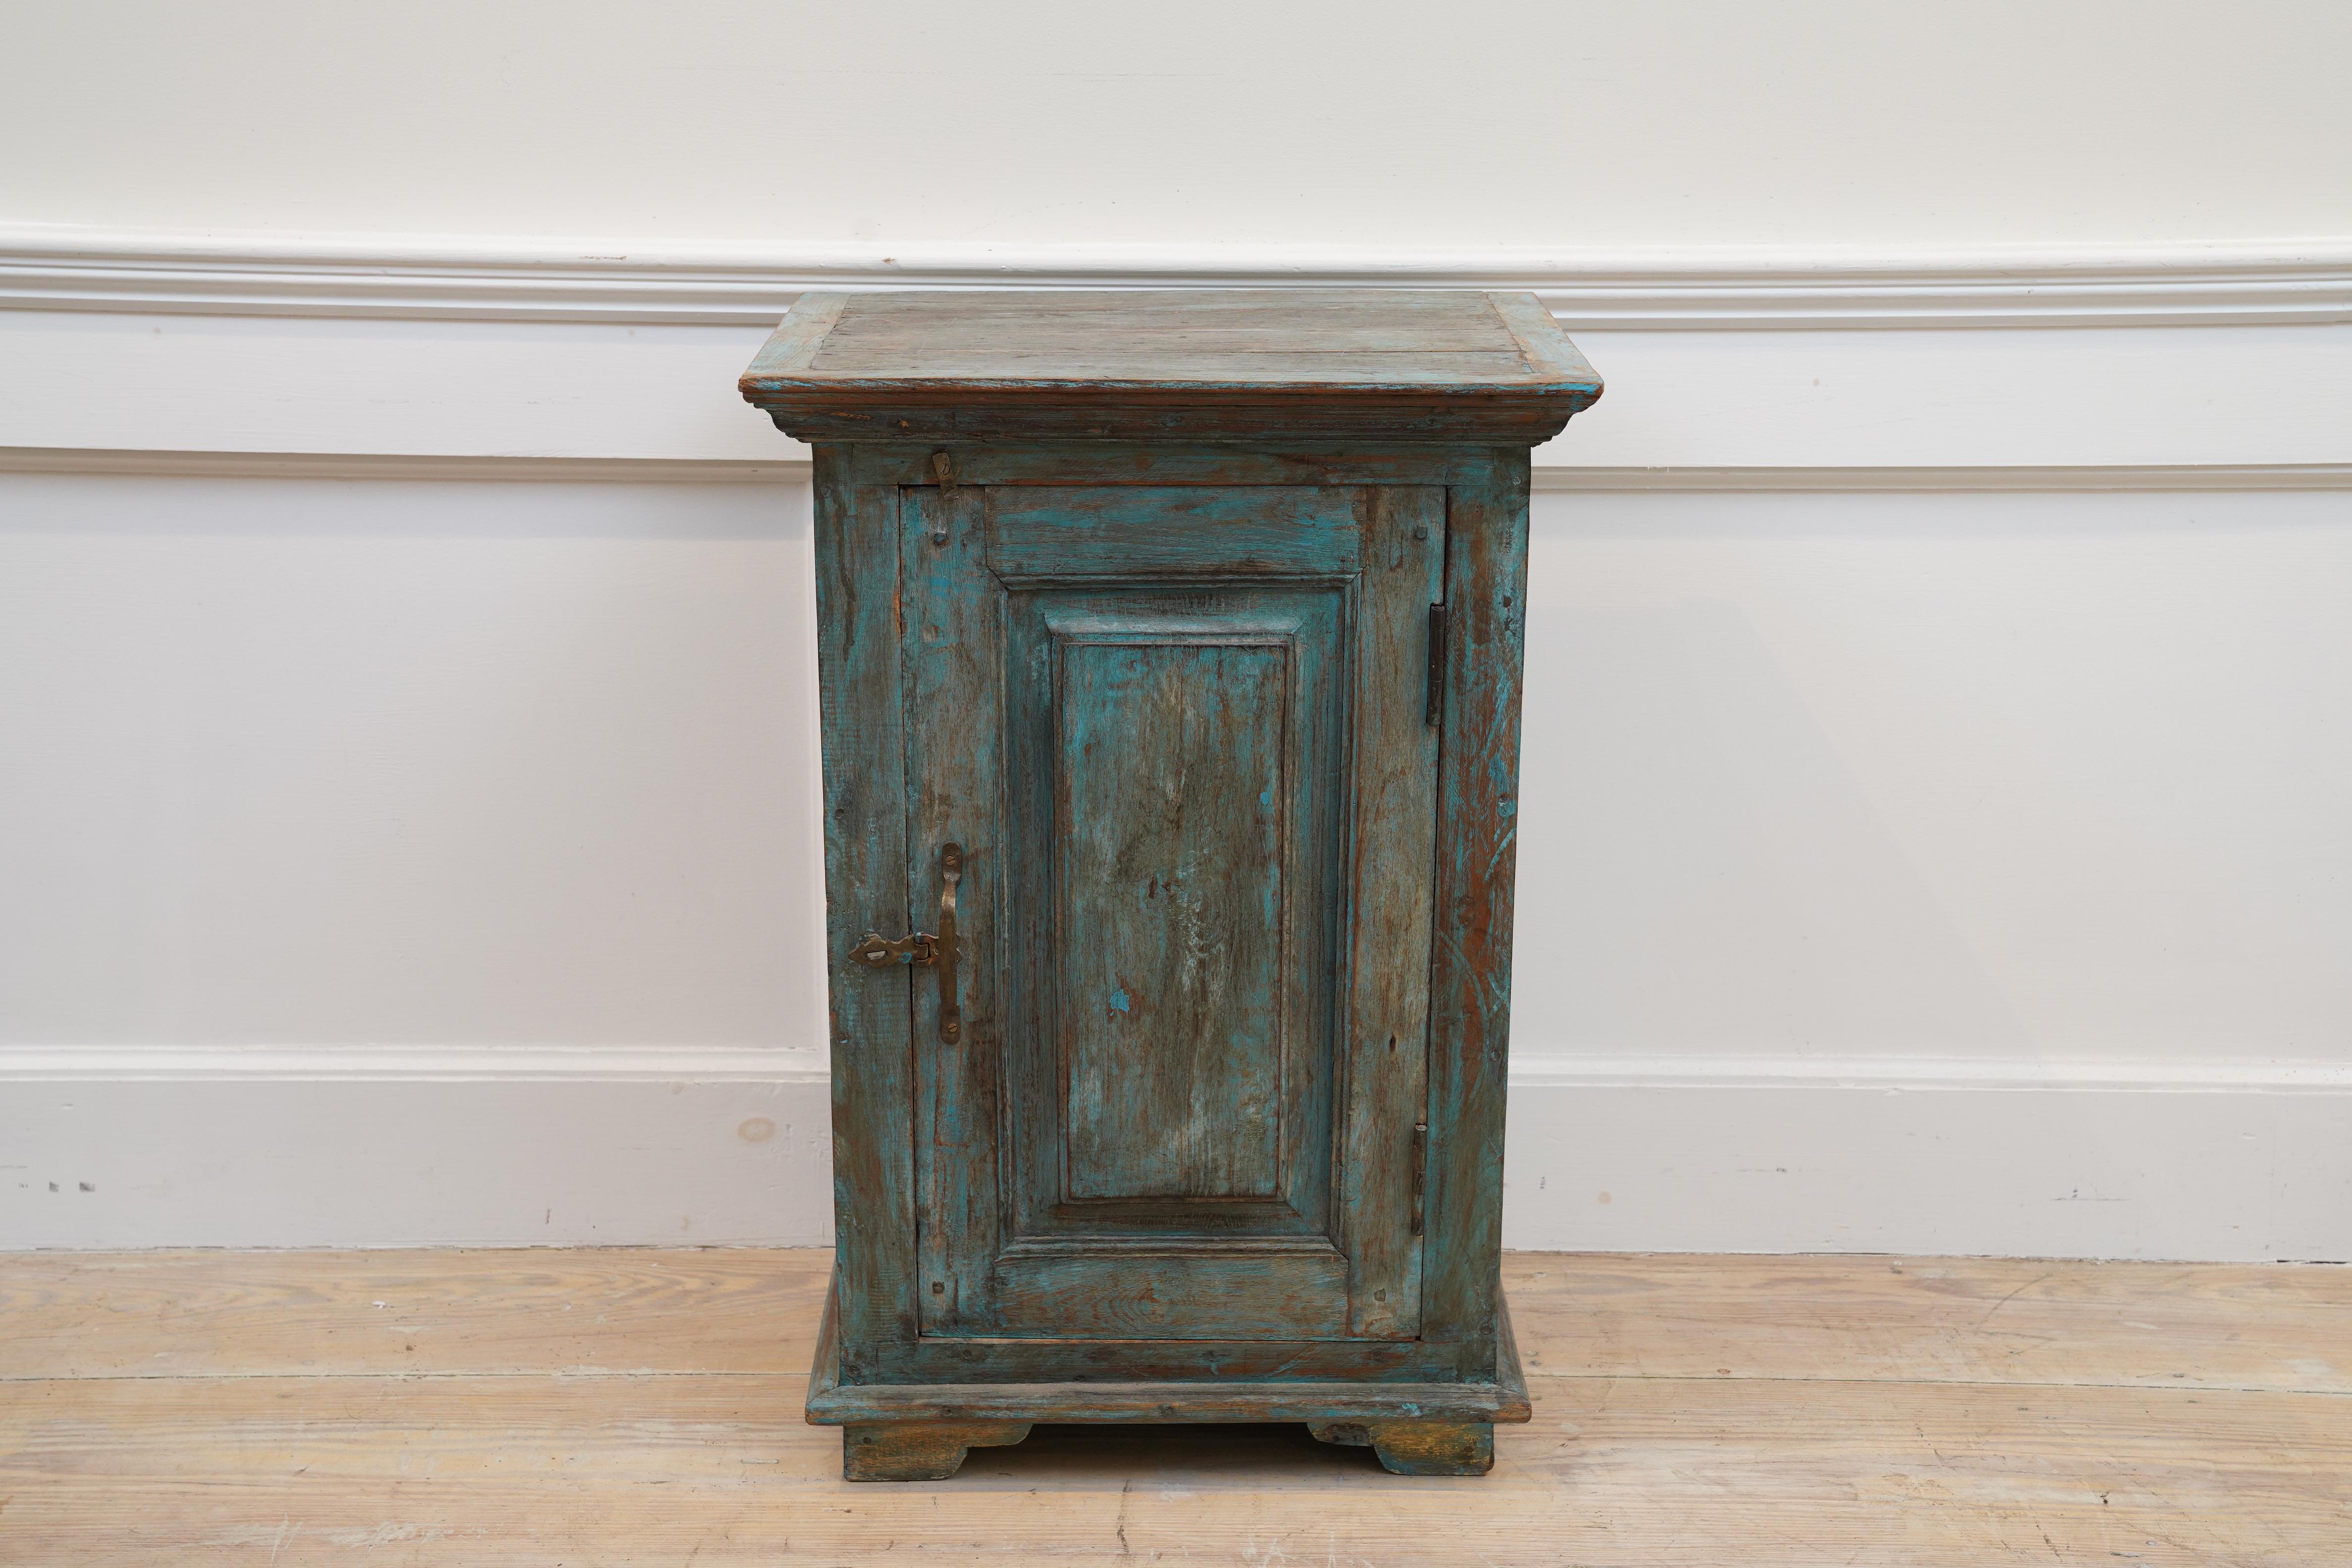 A petite teak cabinet with original blue/green paint. Raised panel door front, carved top moulding, interior shelf and brass hardware. Just the body portion measures 12.5